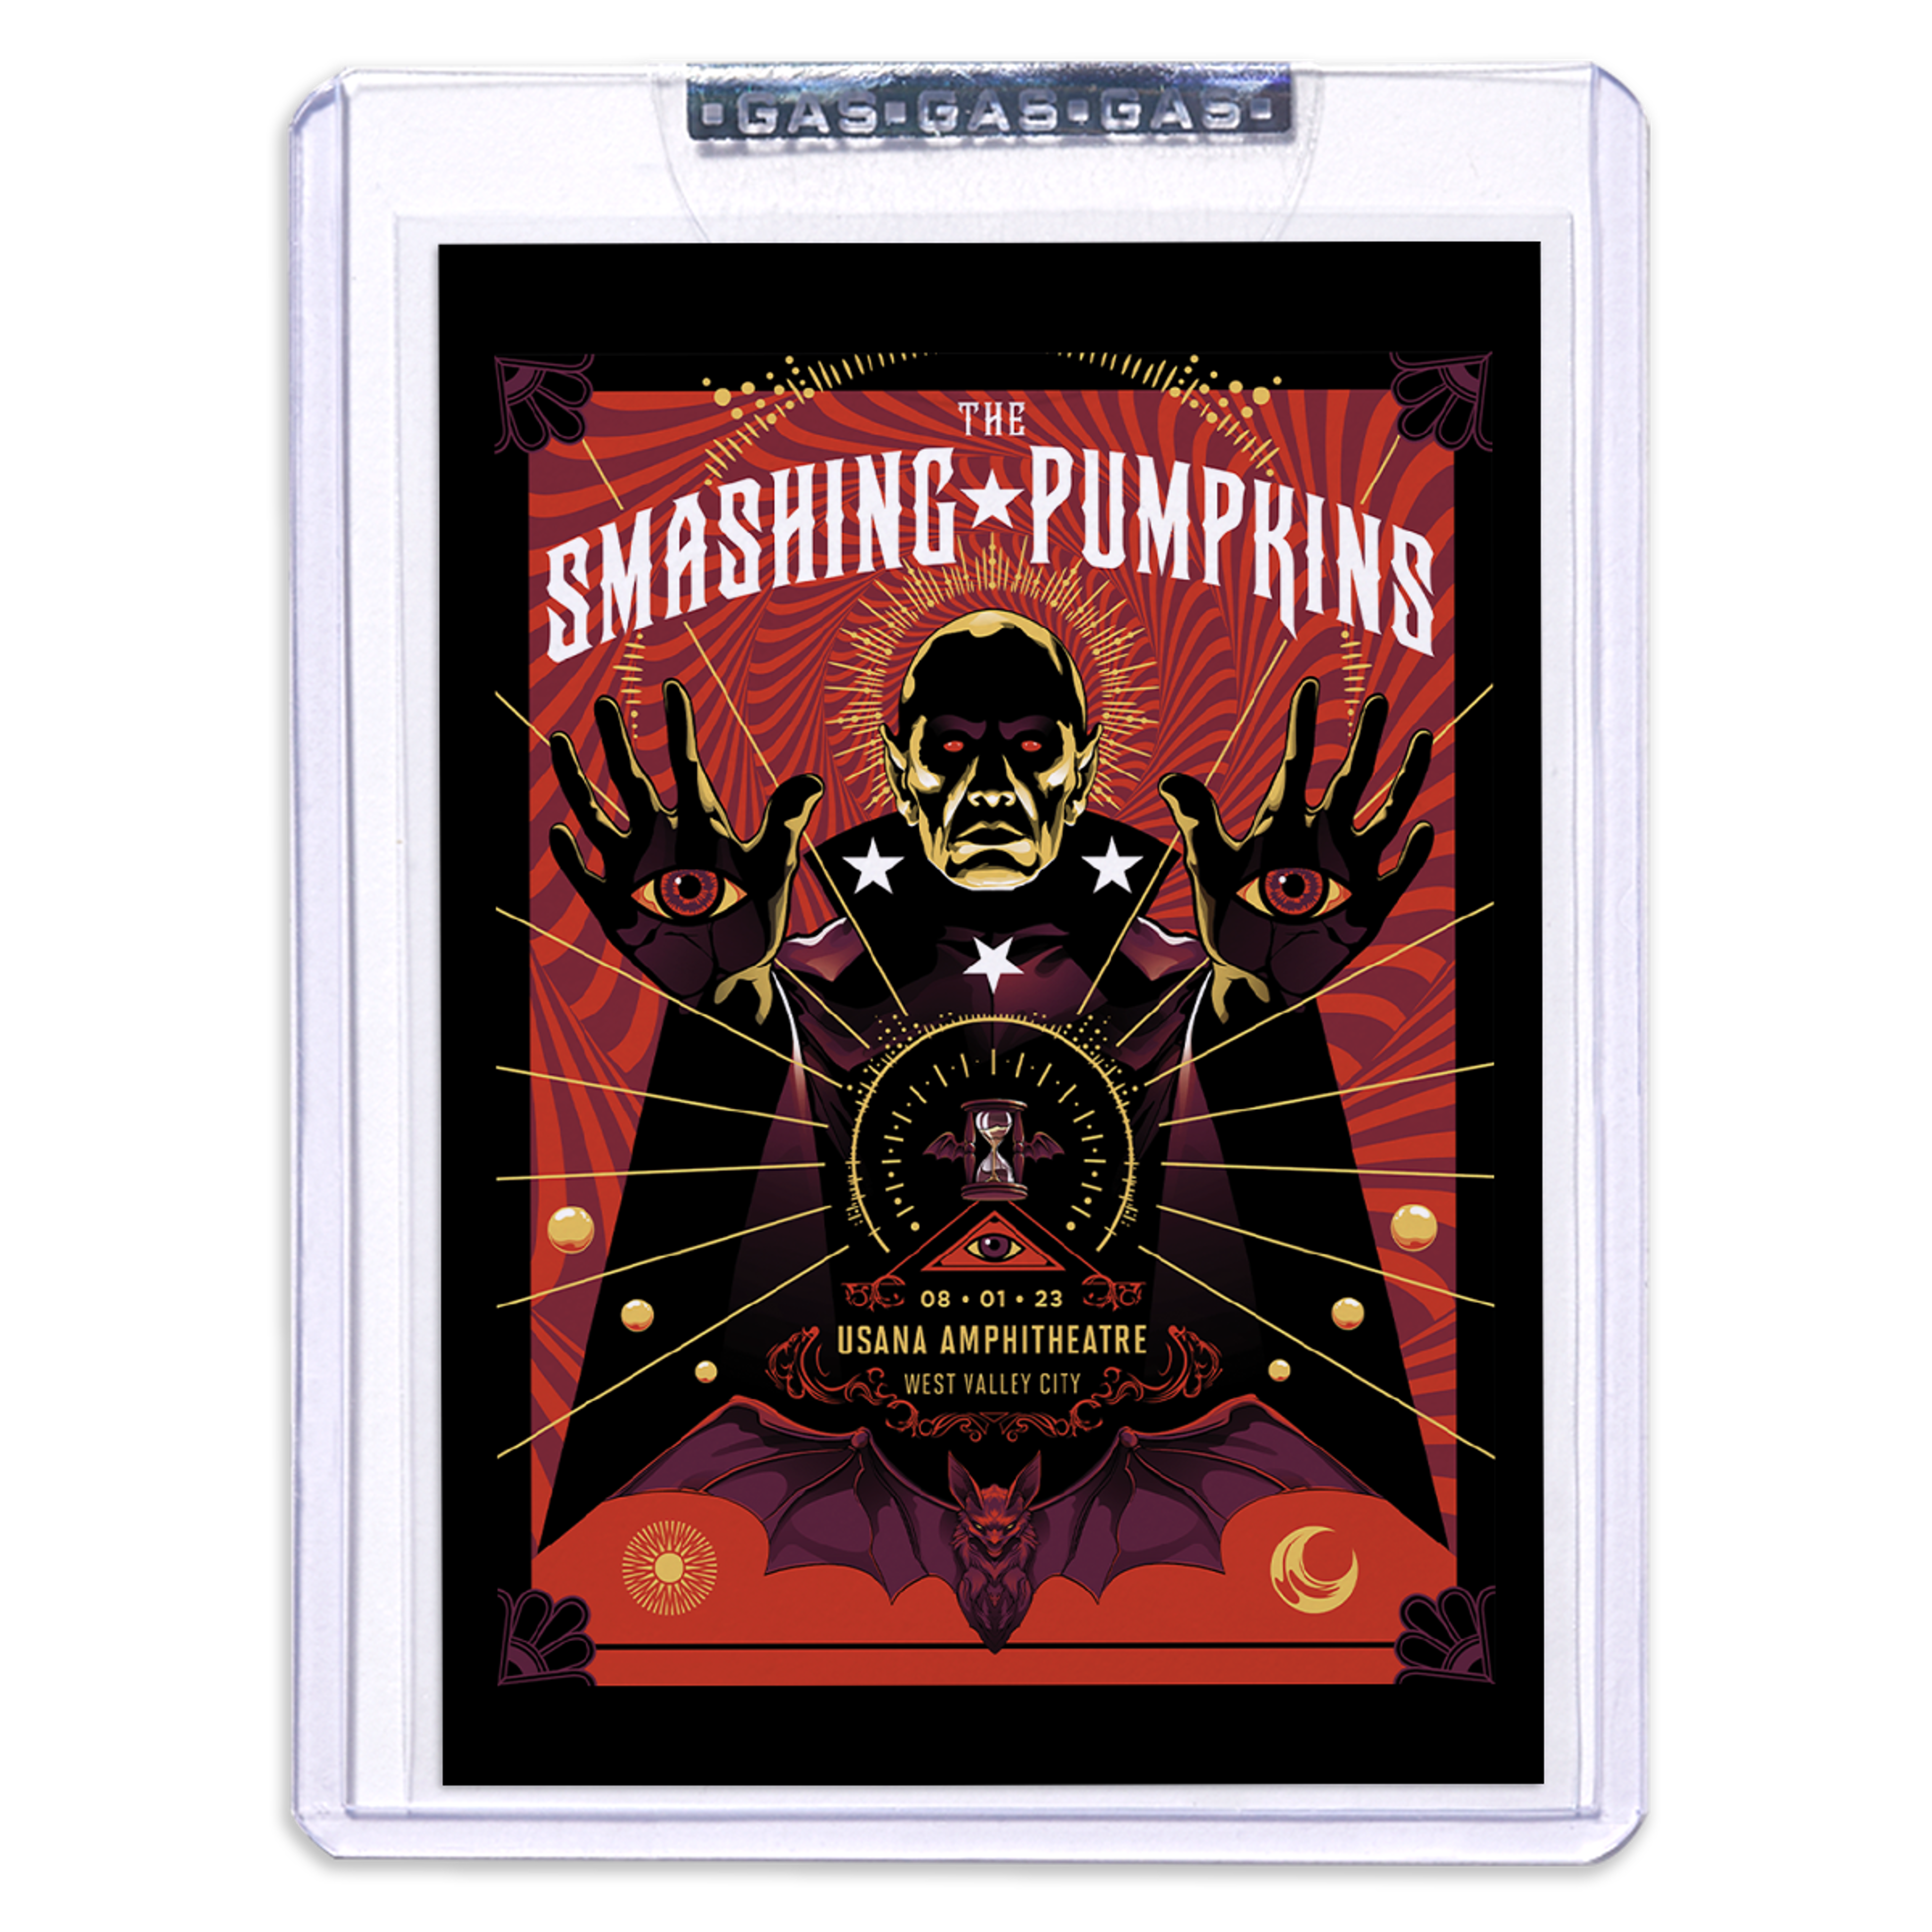 Alternate View 1 of The Smashing Pumpkins West Valley City August 1, 2023 Poster & S